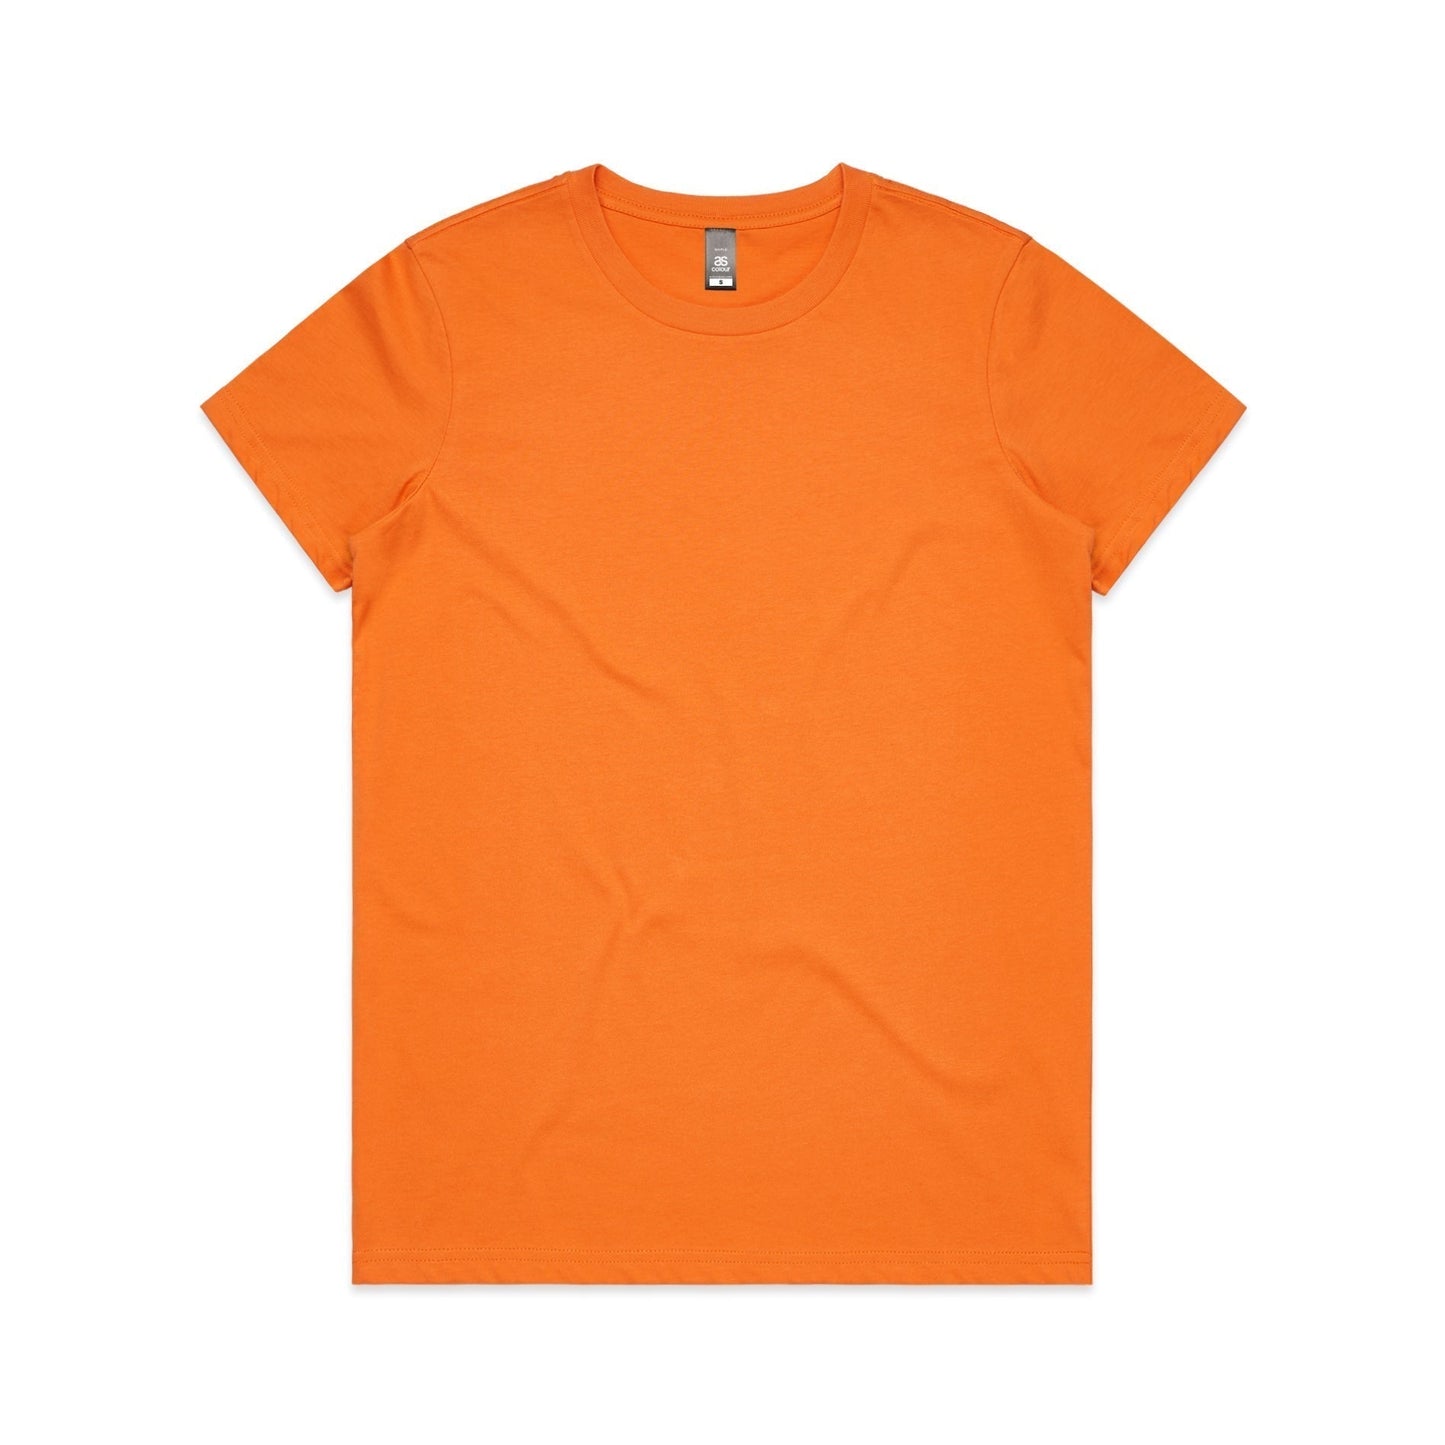 "Inclusion Matters" Relaxed Maple T-Shirt